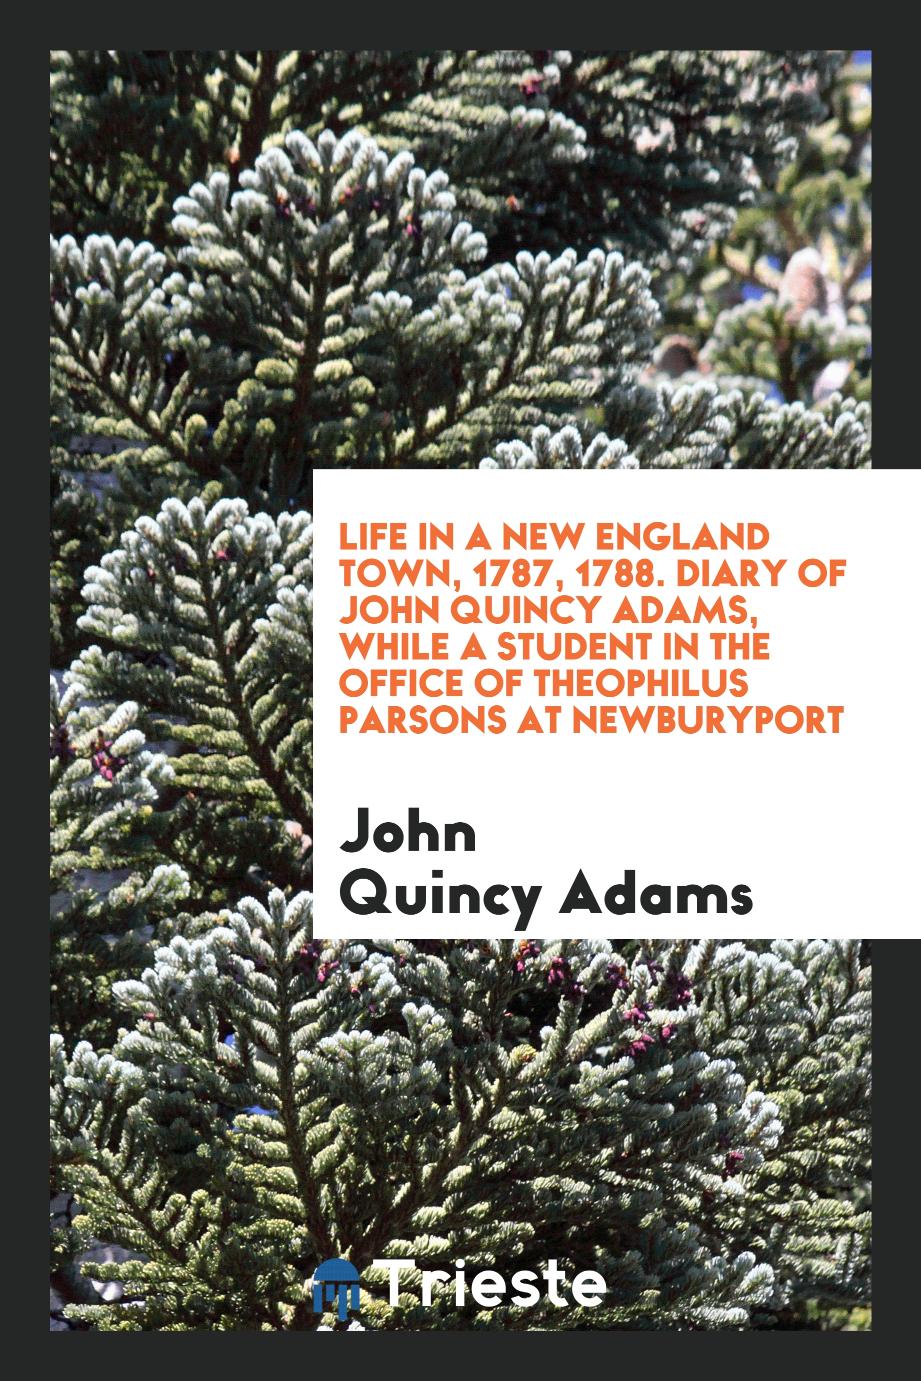 Life in a New England town, 1787, 1788. Diary of John Quincy Adams, while a student in the office of Theophilus Parsons at Newburyport